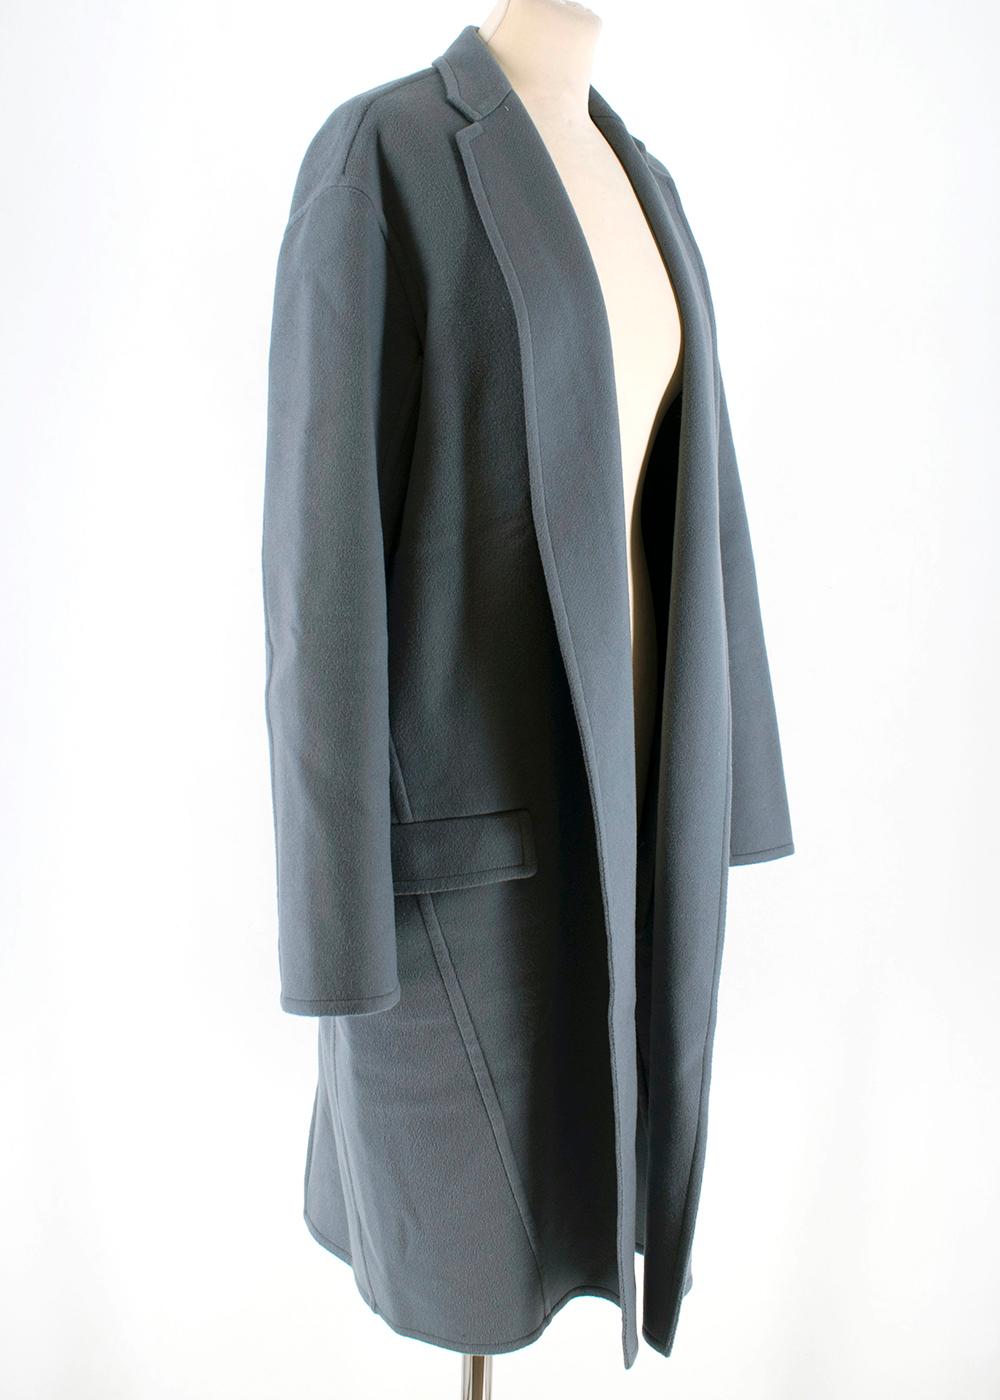 Celine Long Cashmere Coat 

- Long Sleeves
- OverSized Fit 
- Side Pockets 
- Back Slit 

100% Cashmere

Made in Italy 

Please note, these items are pre-owned and may show signs of being stored even when unworn and unused. This is reflected within